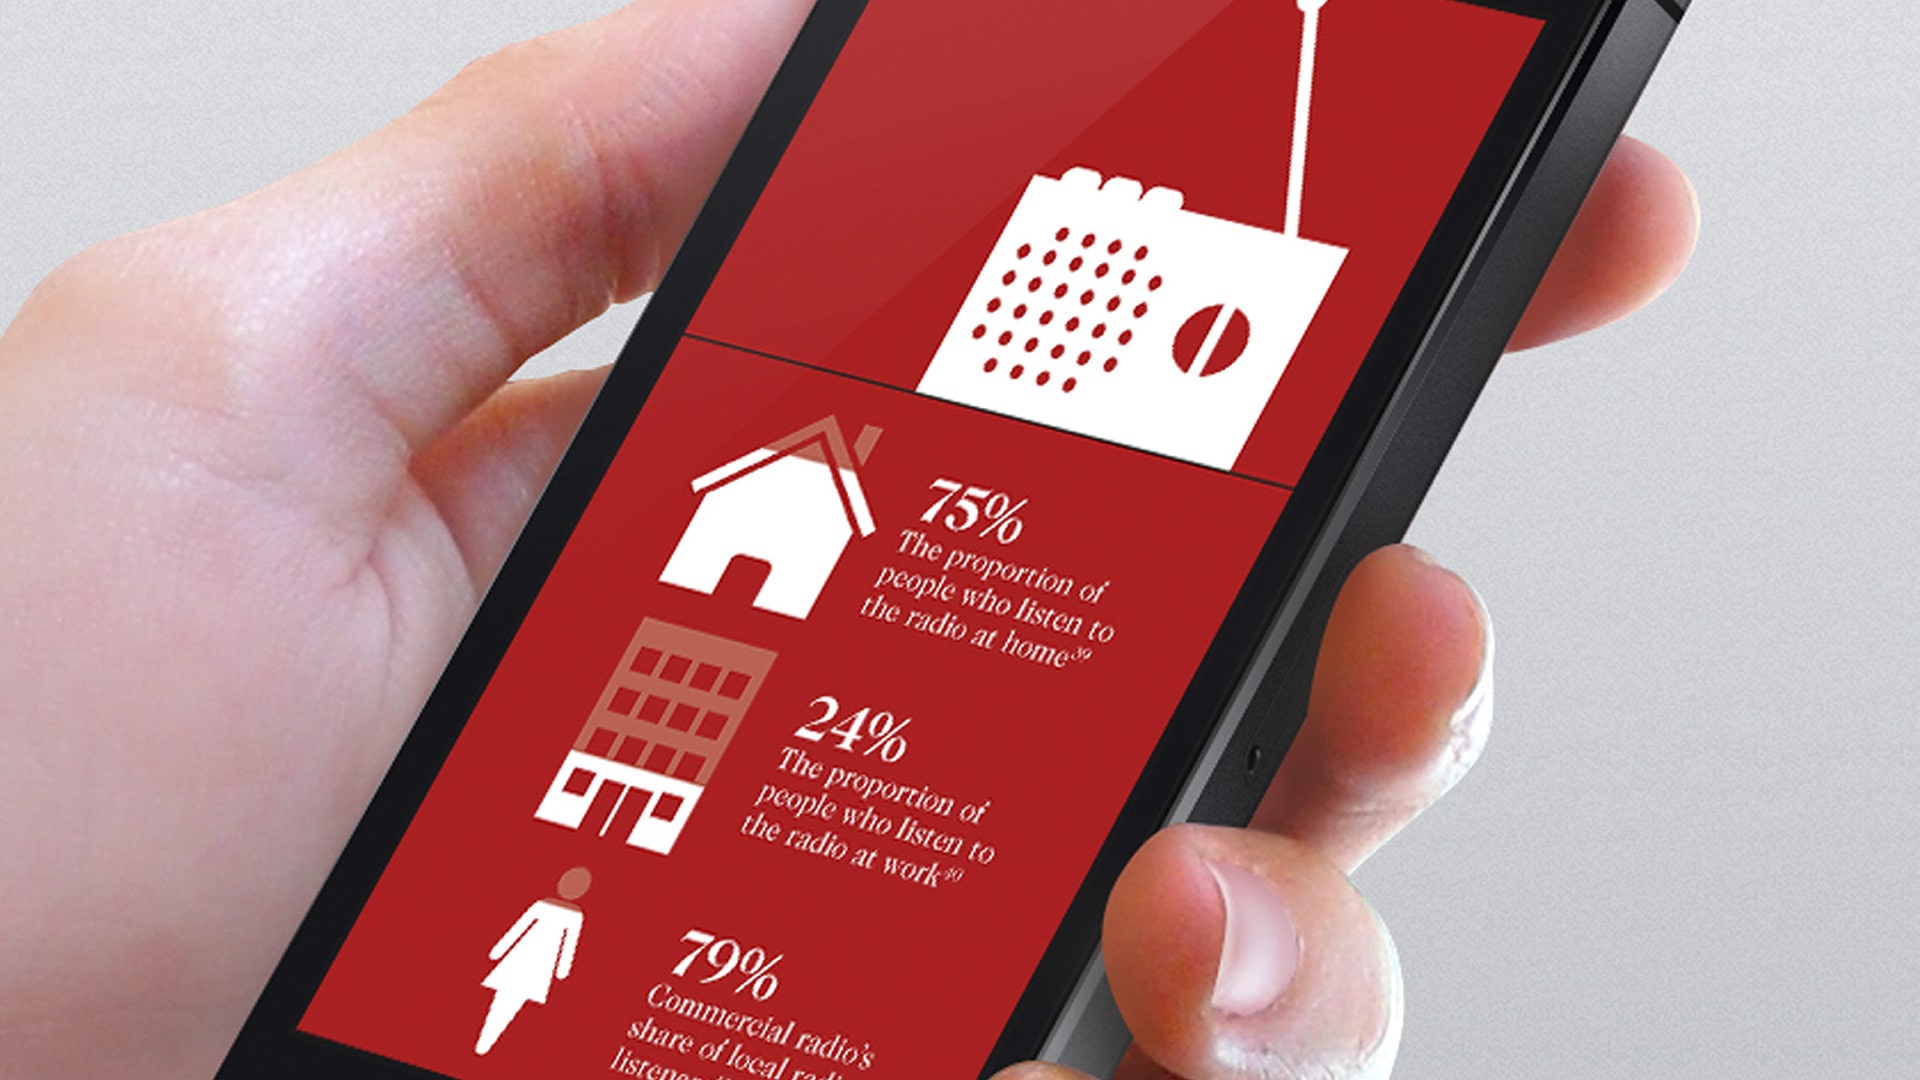 A person holding a mobile phone displaying the Advertising Association Ad Pays Report Radio Infographic with red background and white radio, buildings and people icons and percentages.